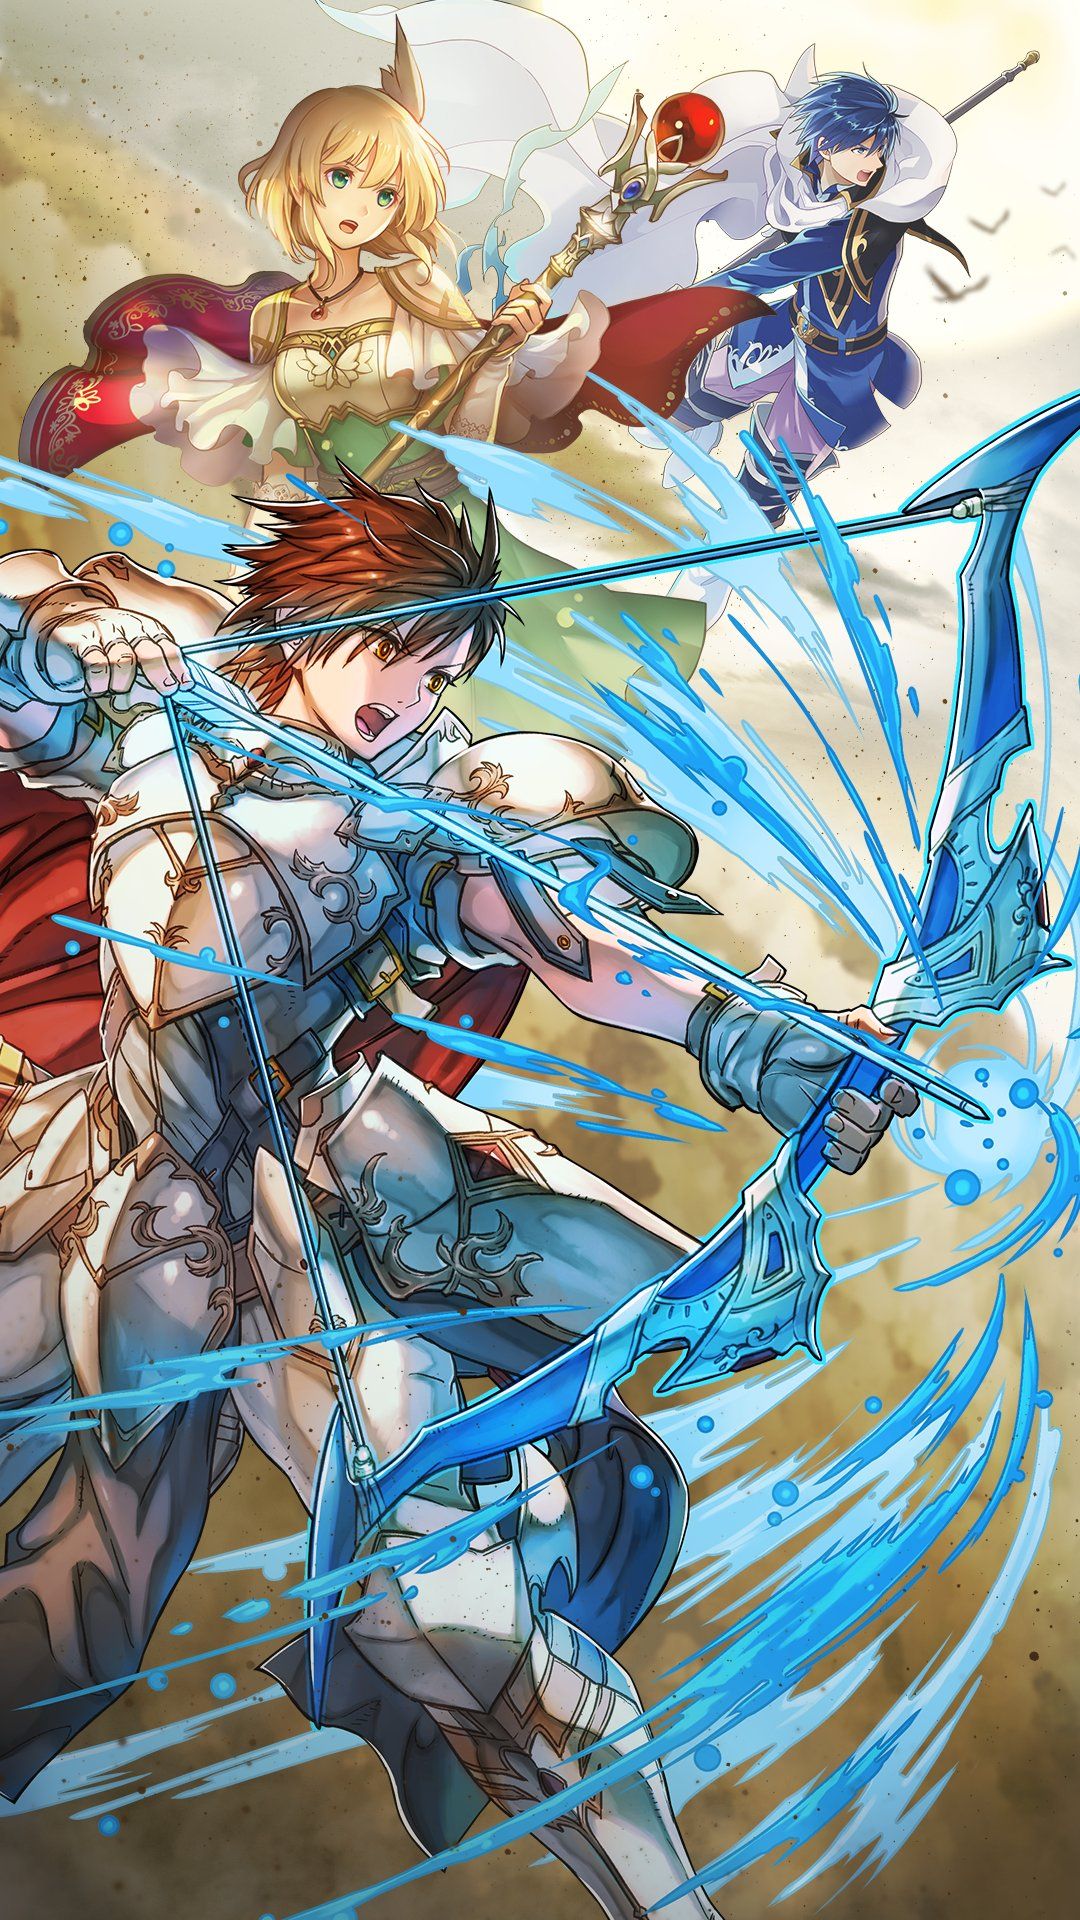 Fire Emblem Heroes're giving out an original wallpaper and original calendar wallpaper for November 2019! This time it features Leif: Unifier of Thracia, Nanna: Nordion Princess, and Finn: Lance